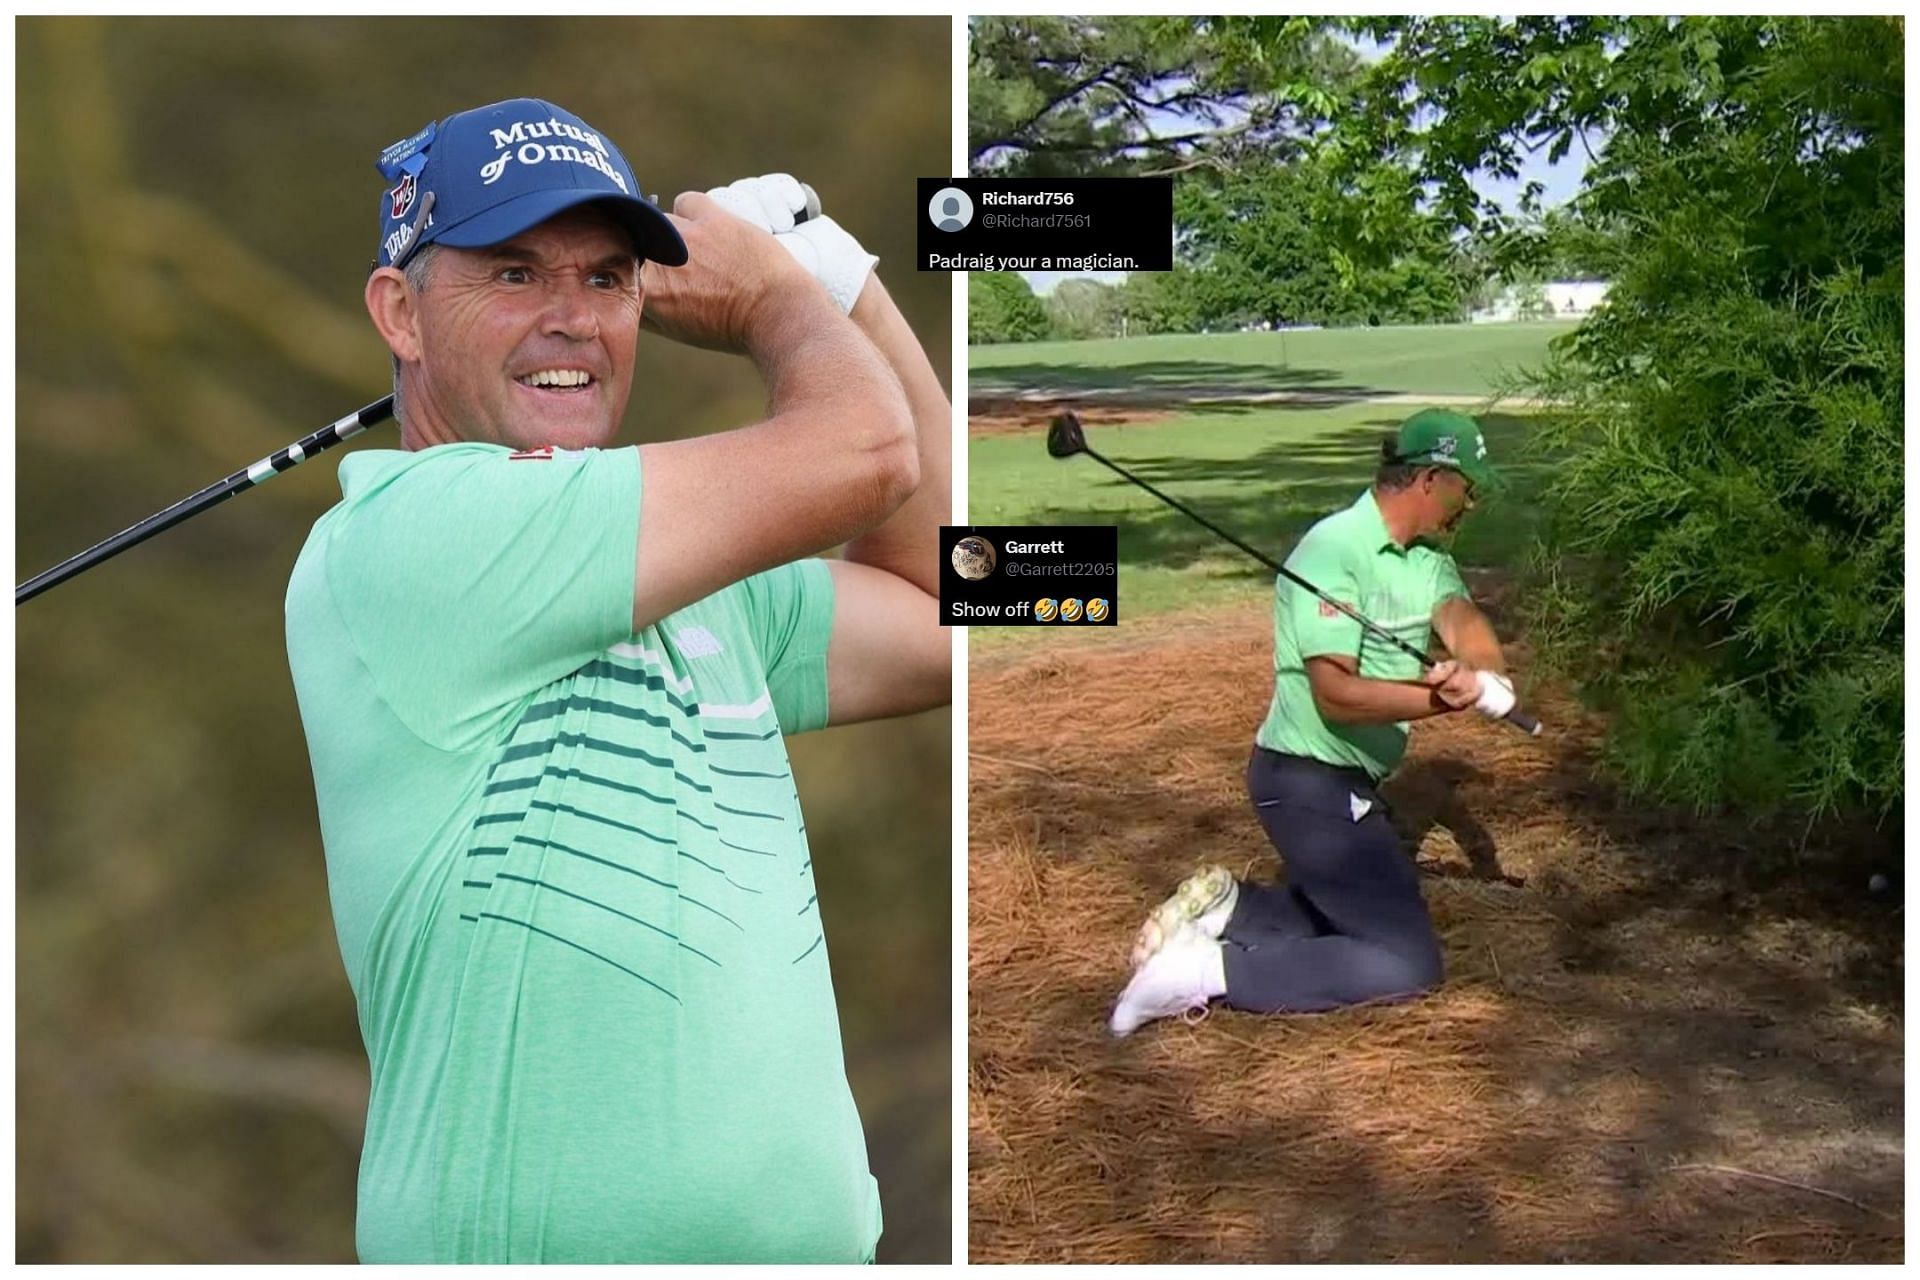 “Padraig you’re a magician” “Show off” – Fans react to Padraig Harrington boasting making par at Houston Open with an ‘unreal’ recovery shot